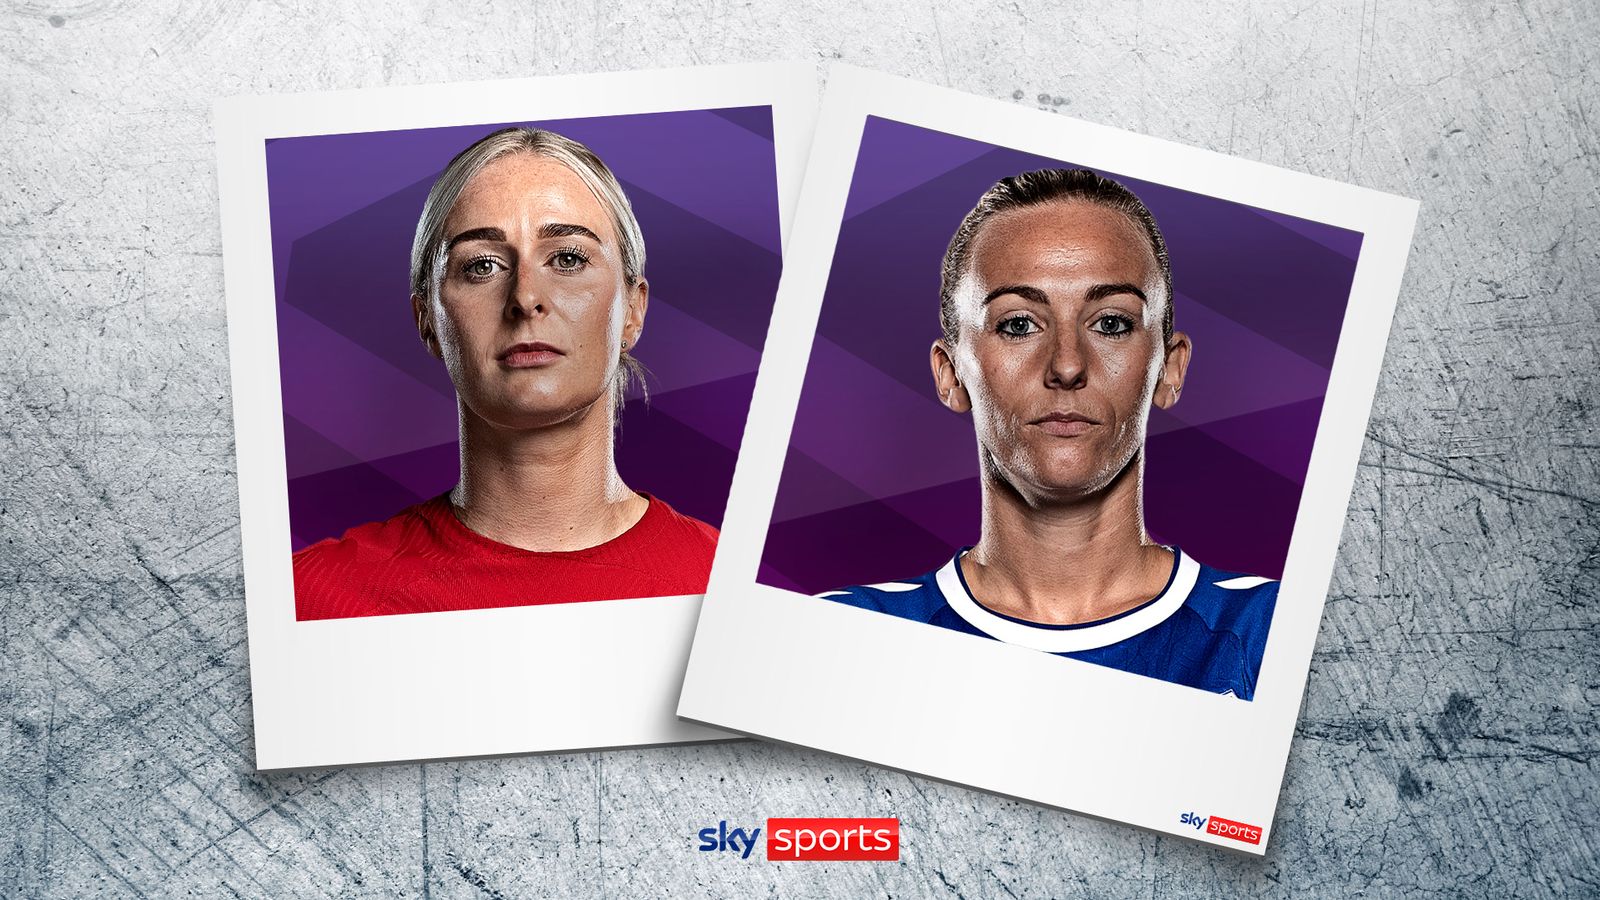 rhiannon-roberts-liverpool-ready-to-prove-women-s-super-league-staying-power-in-tasty-merseyside-derby